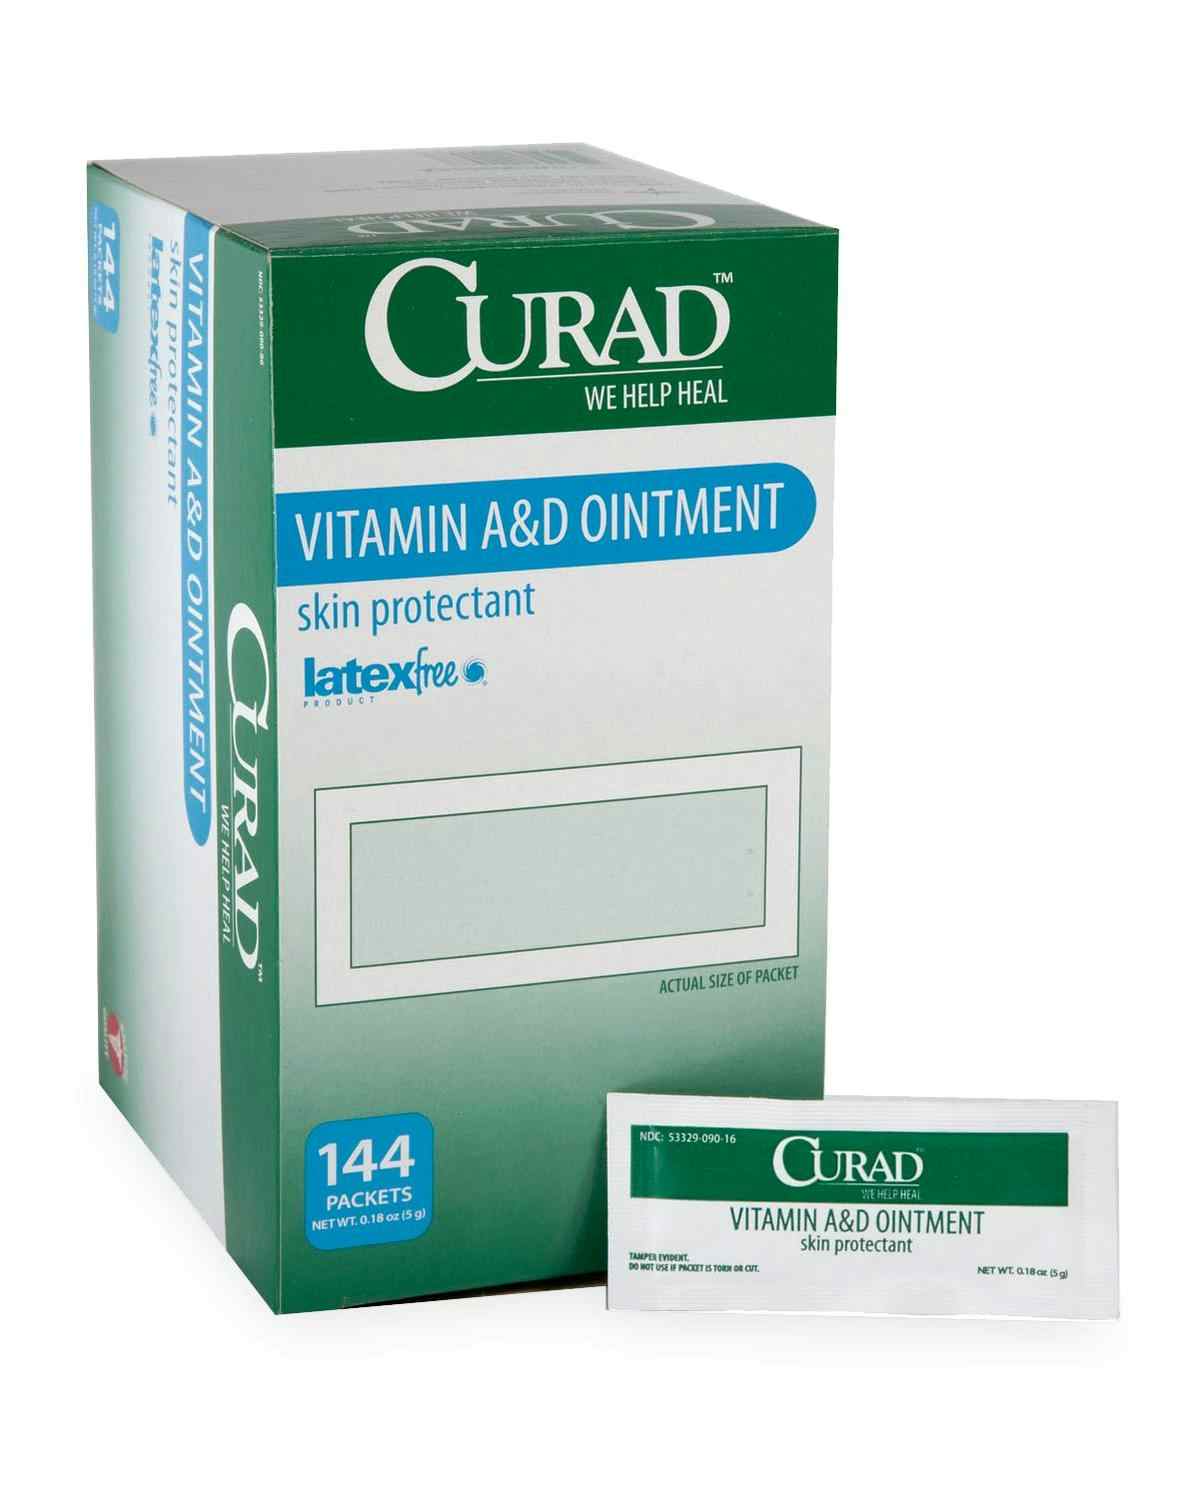 Curad Vitamin A and D Ointment, CUR003545Z, 5 g Foil Packet - Box of 144